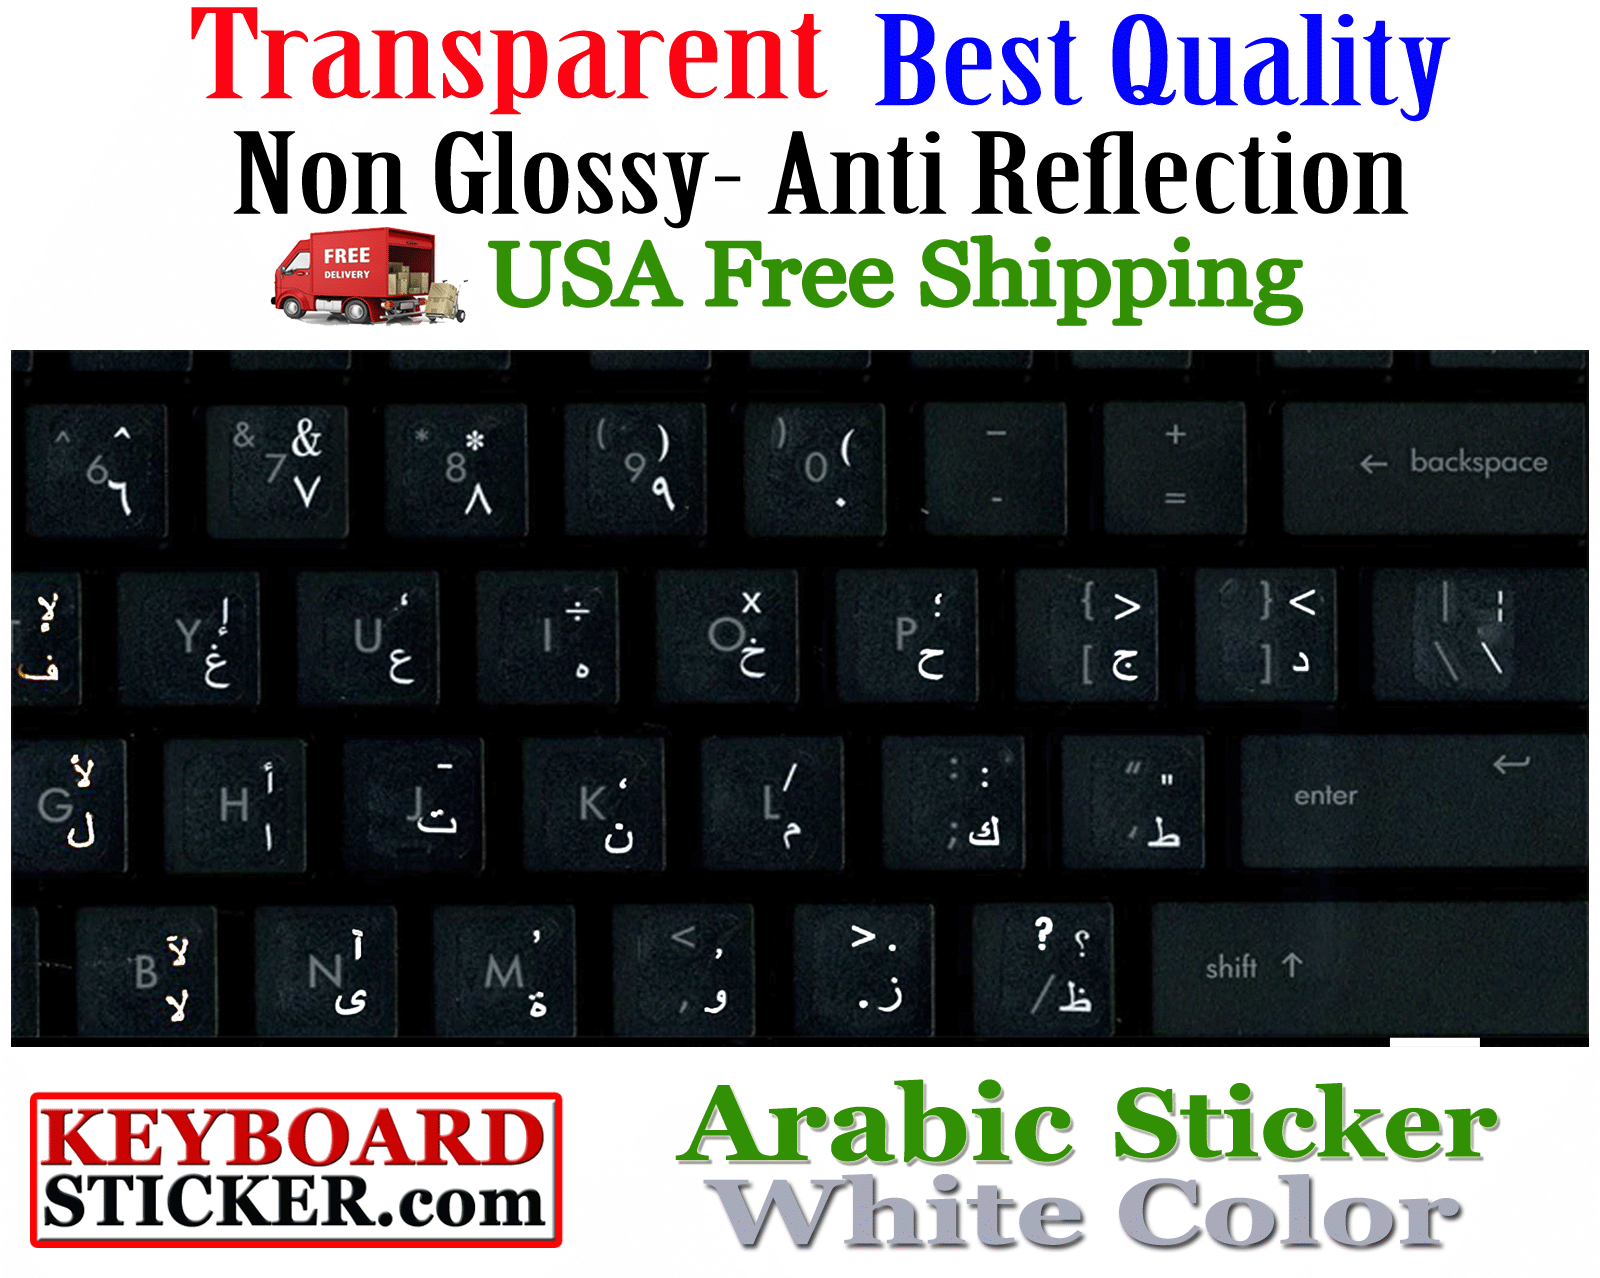 Arabic Keyboard Sticker White Letters No Reflection Best Quality Transparent!